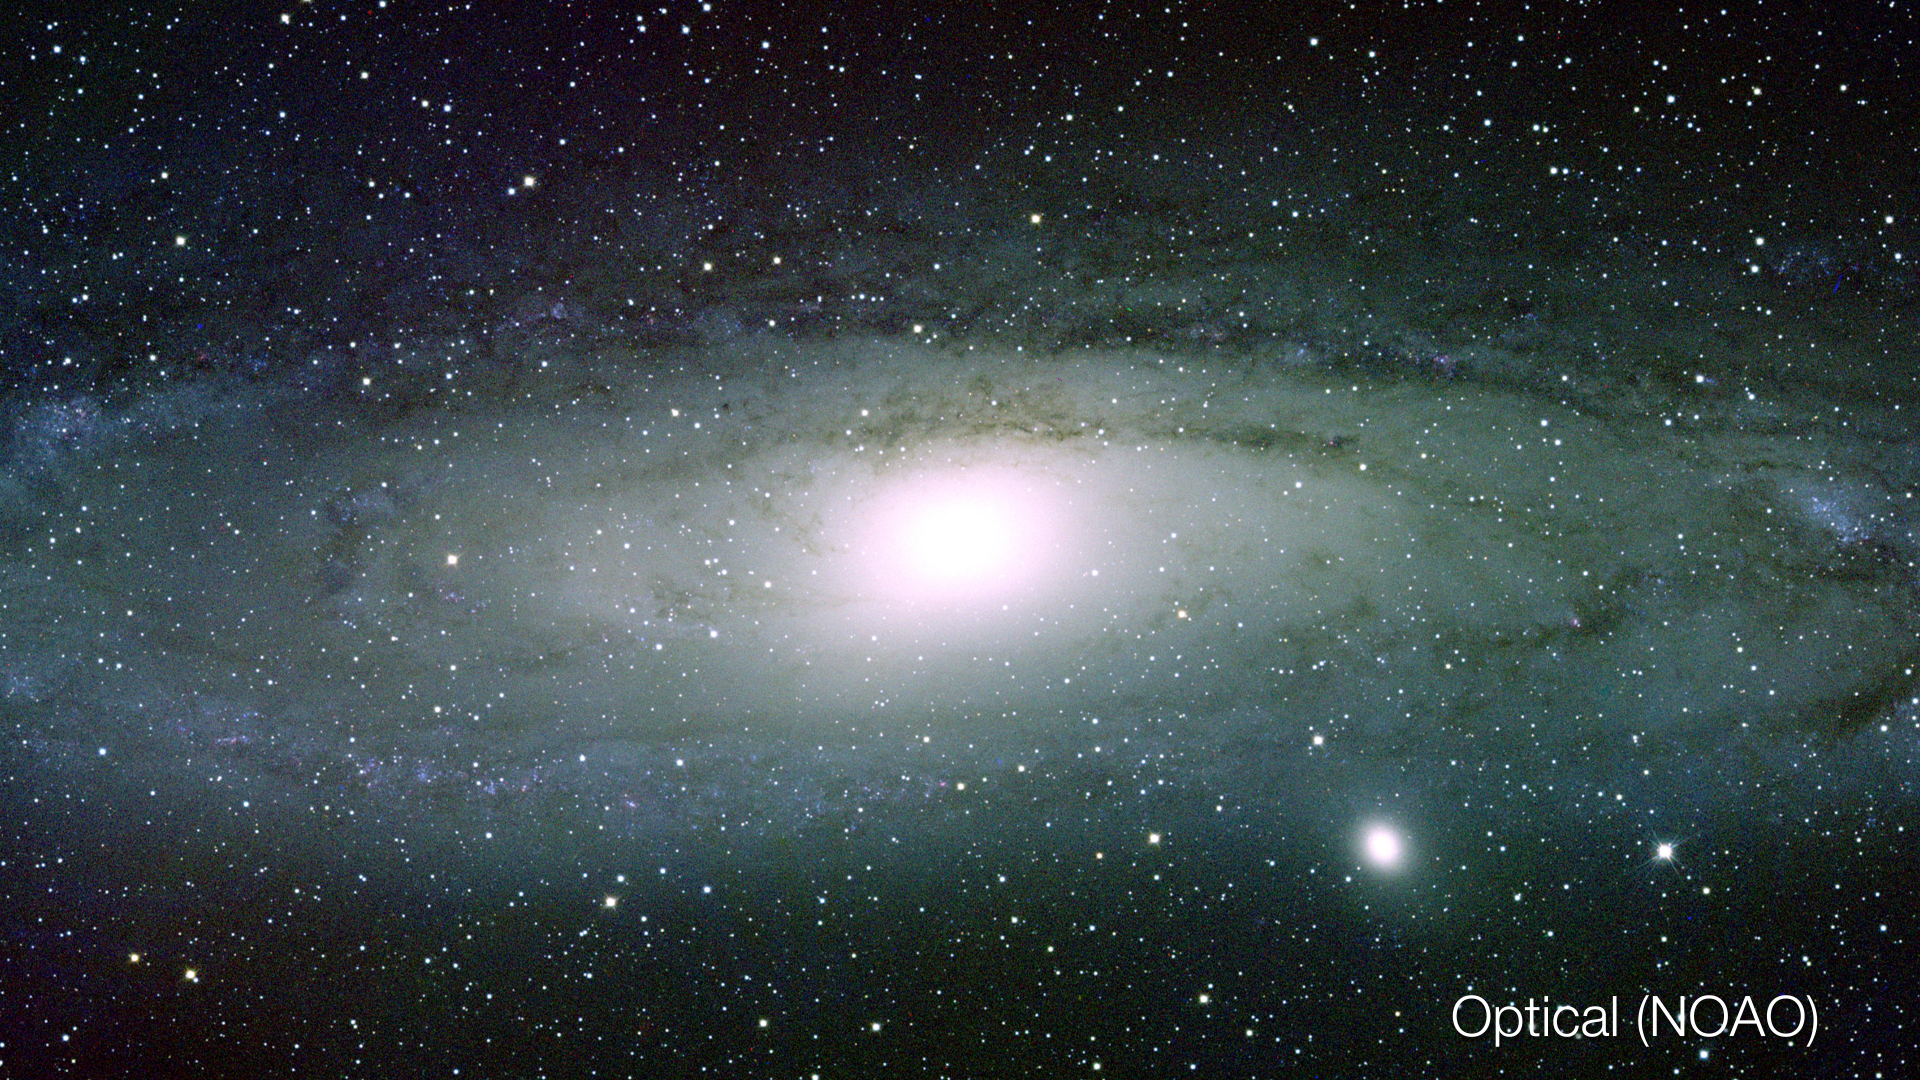 NOAO optical image of AndromedaOptical: This is the classic visible view of the Andromeda Galaxy